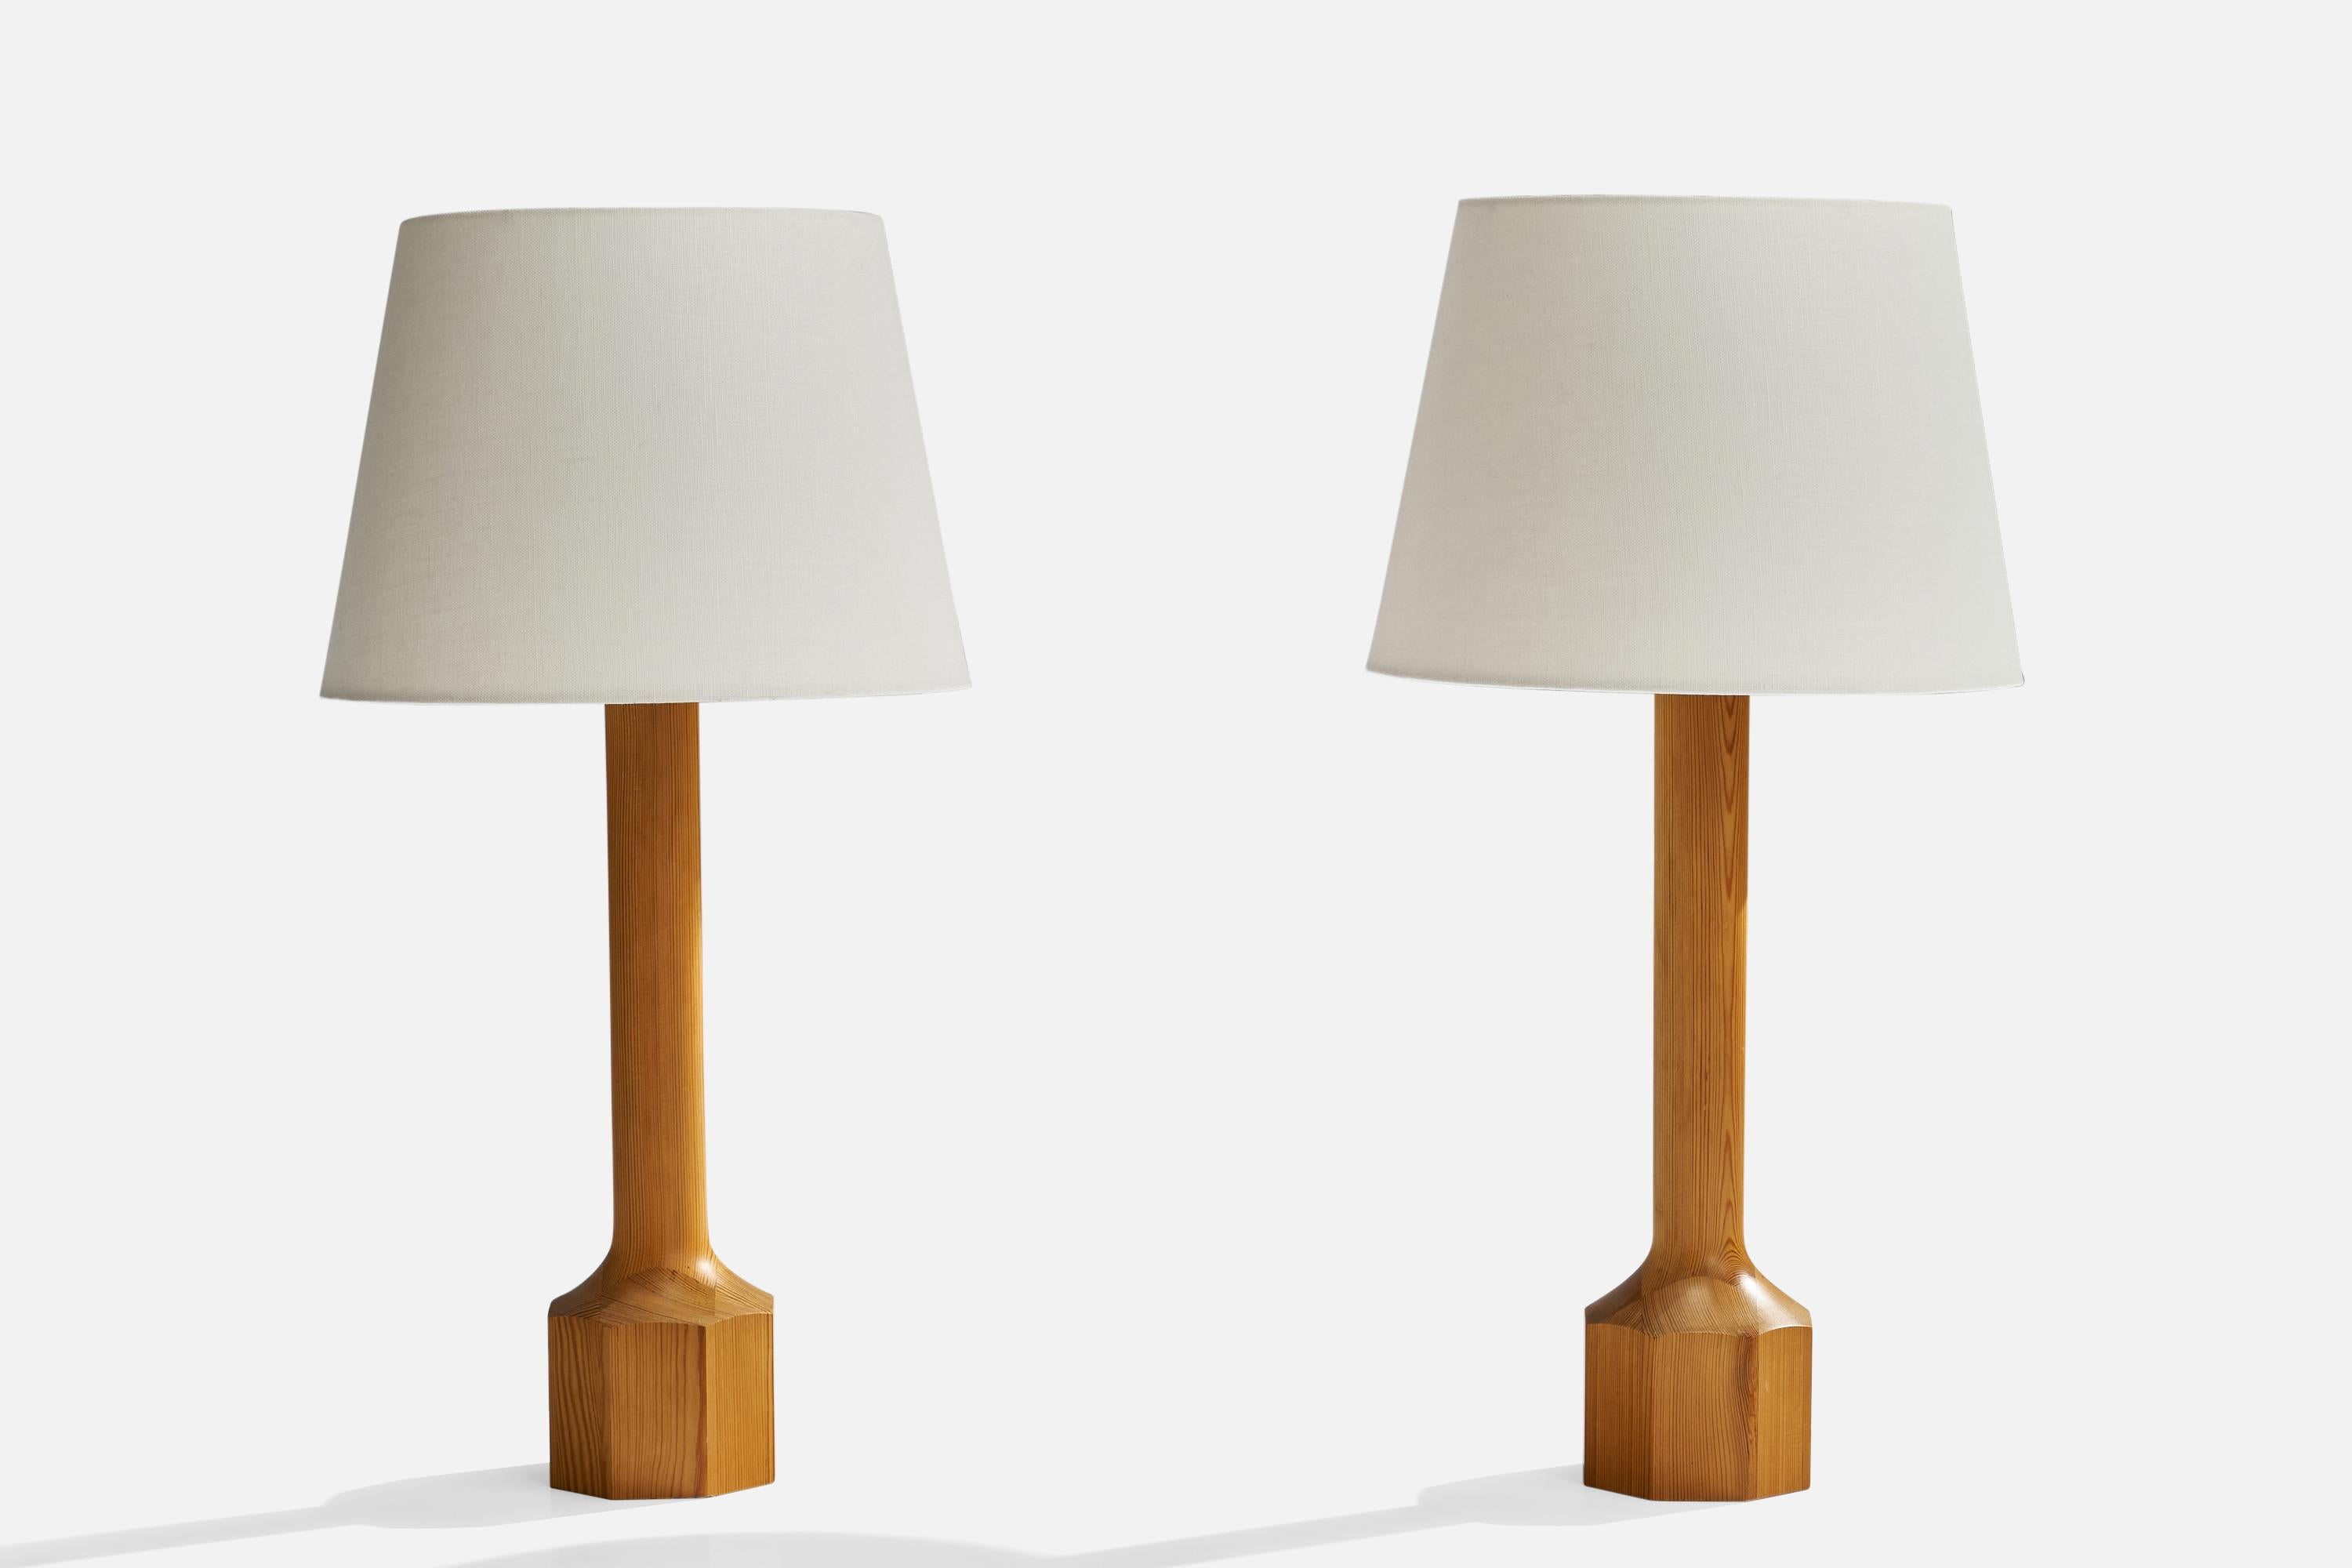 A pair of pine table lamps designed and produced in Sweden, 1970s.

Dimensions of Lamp (inches): 18.5” H x 4.25” Diameter
Dimensions of Shade (inches): 9” Top Diameter x 12” Bottom Diameter x 9” H
Dimensions of Lamp with Shade (inches): 23.75” H x